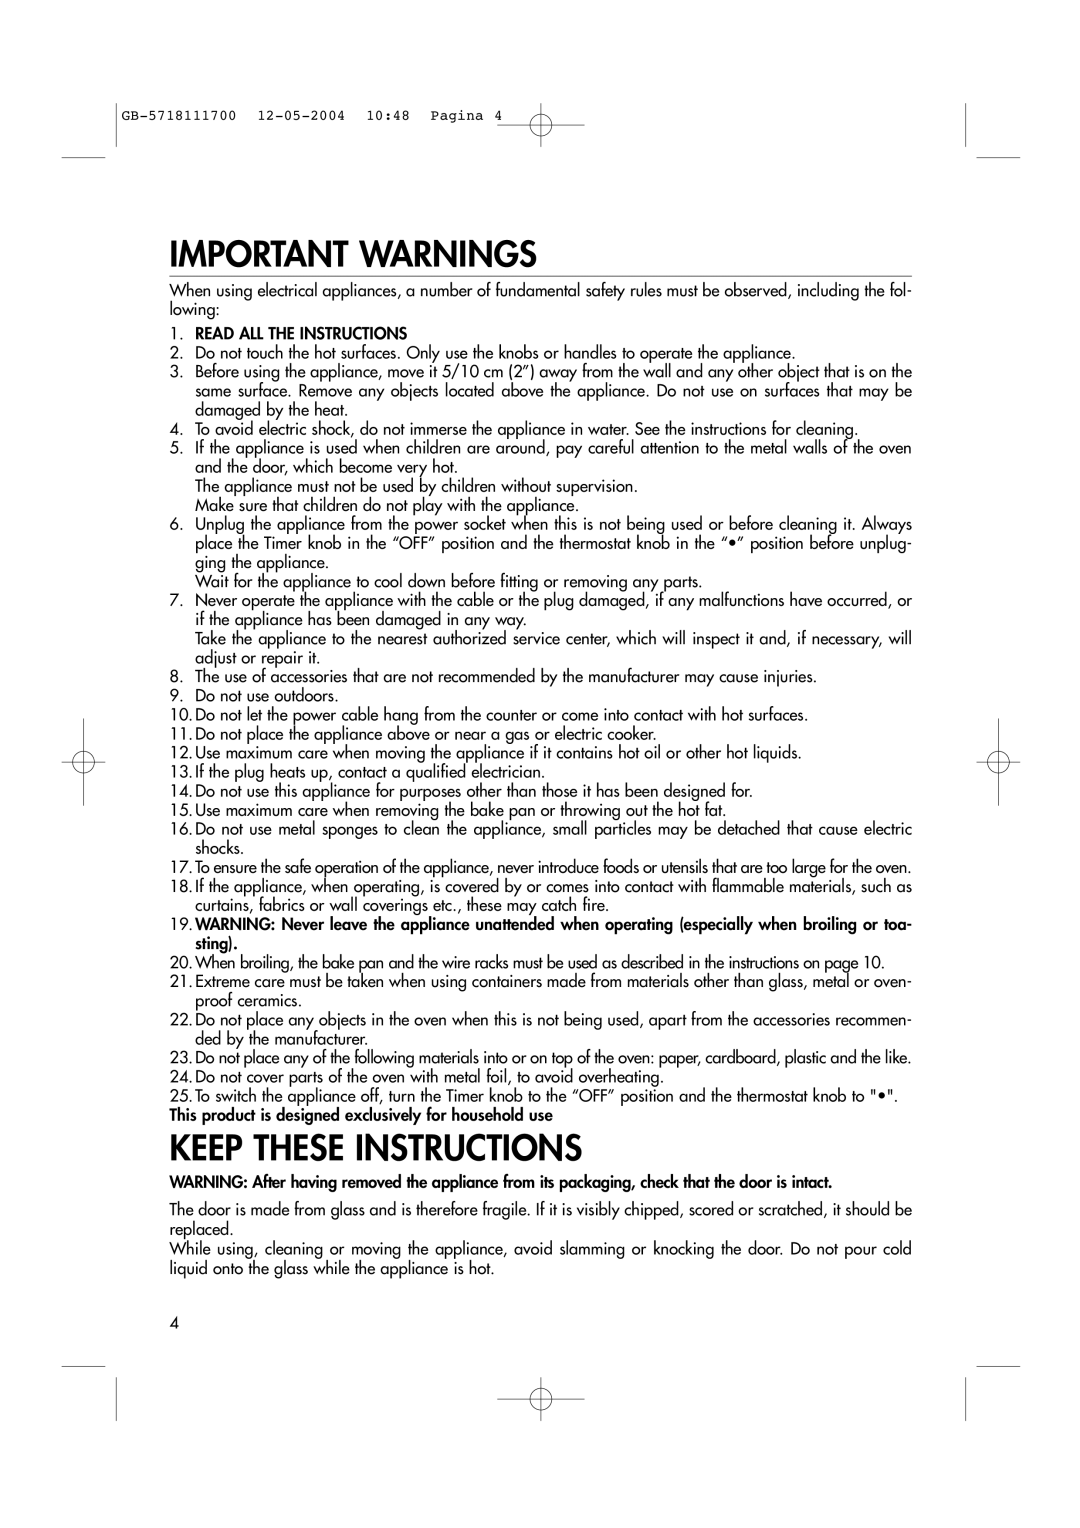 DeLonghi EO1200 Series manual Important Warnings, Keep These Instructions 